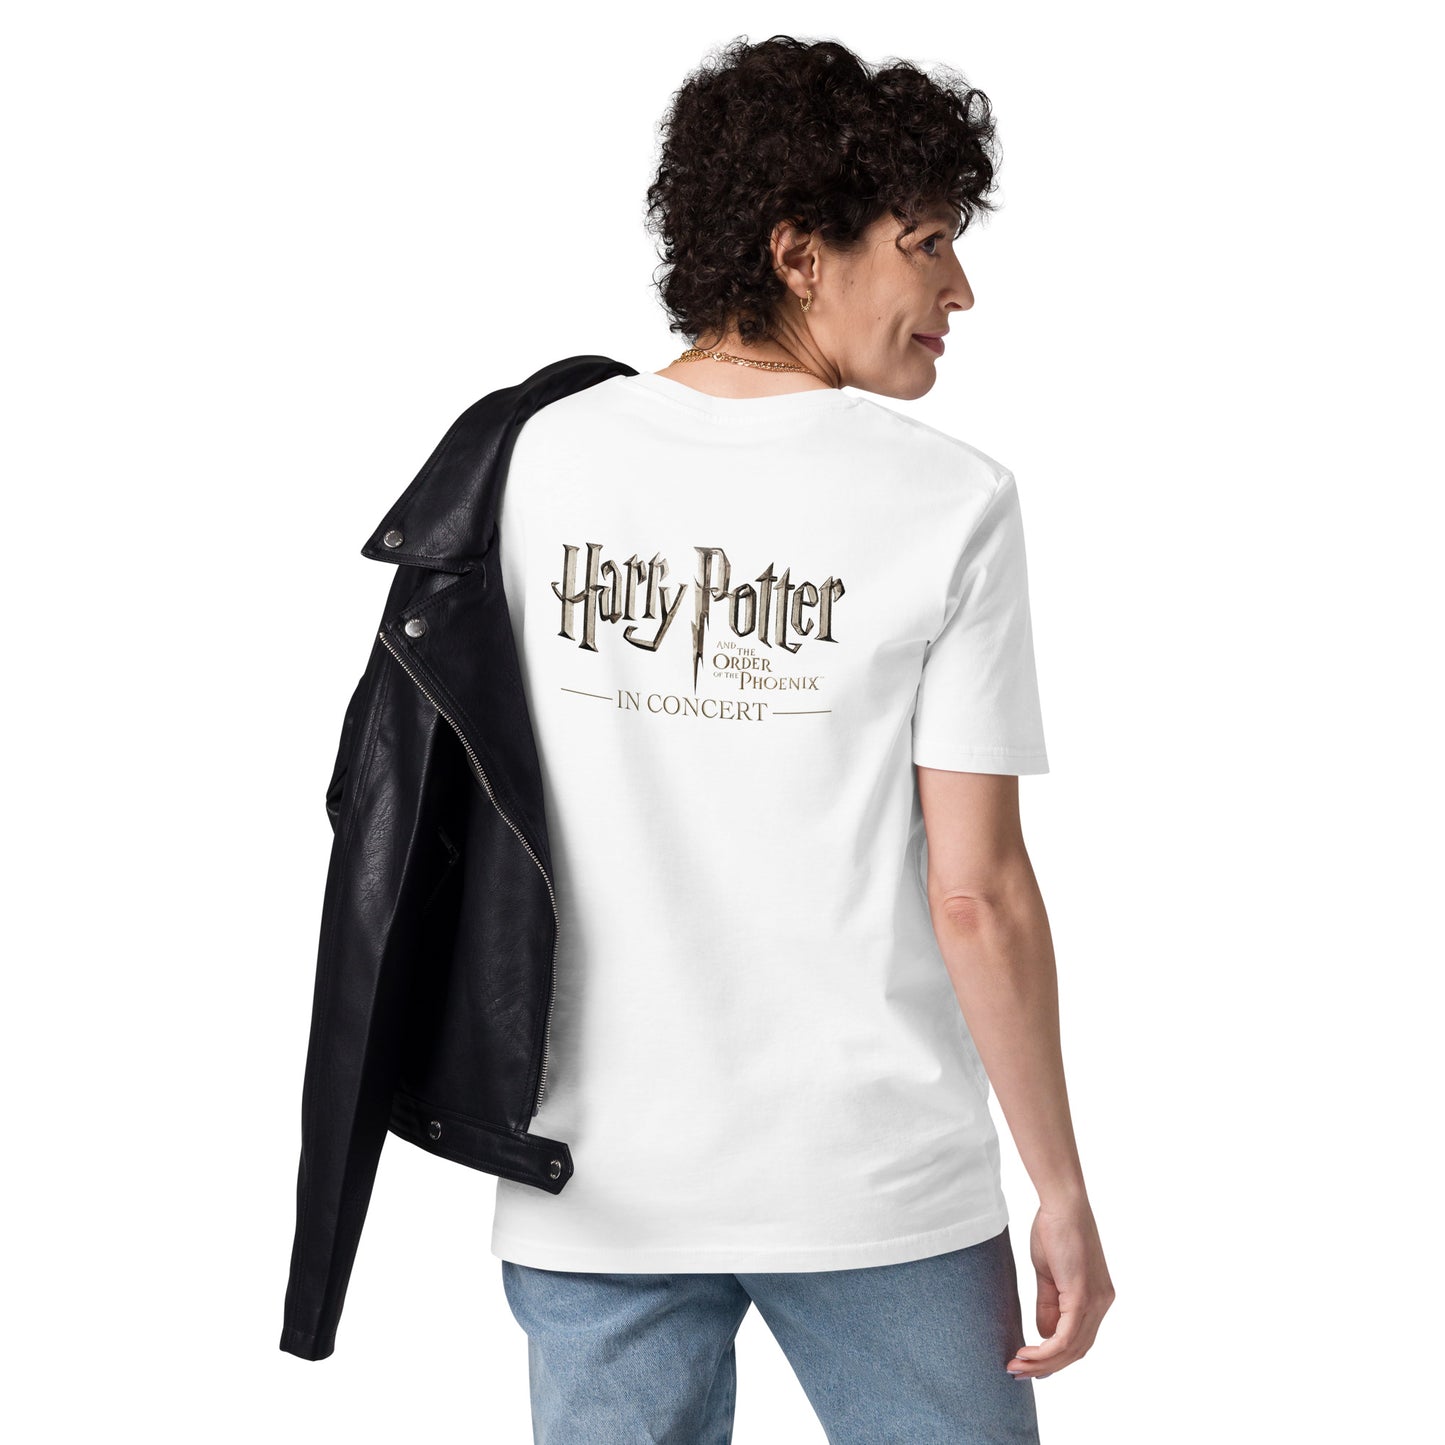 Unisex organic cotton t-shirt ("Dumbledore's Army" from Harry Potter and the Order of the Phoenix™ in Concert)